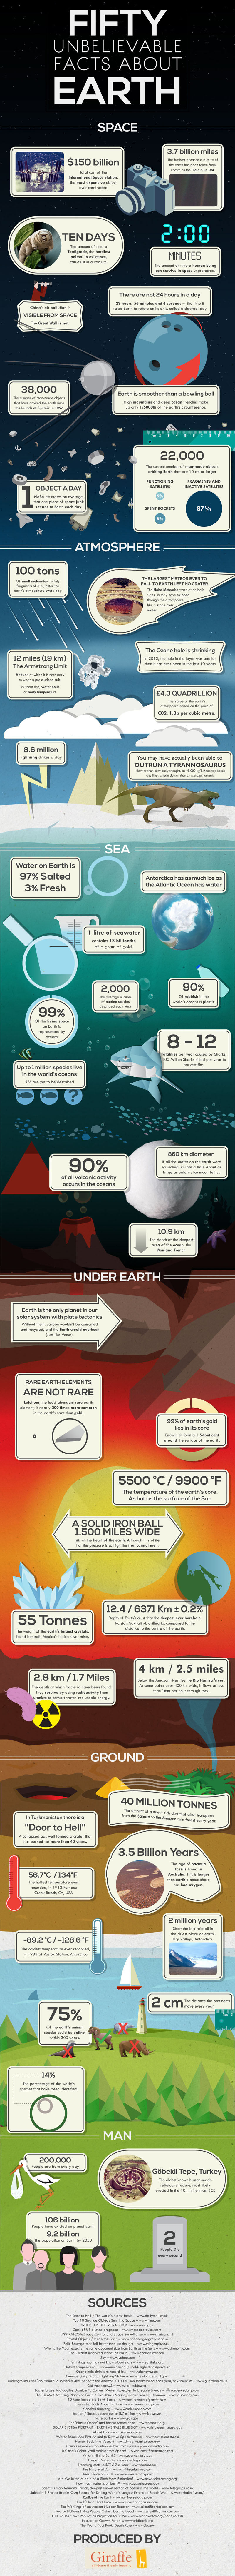 50-facts-about-earth3-1